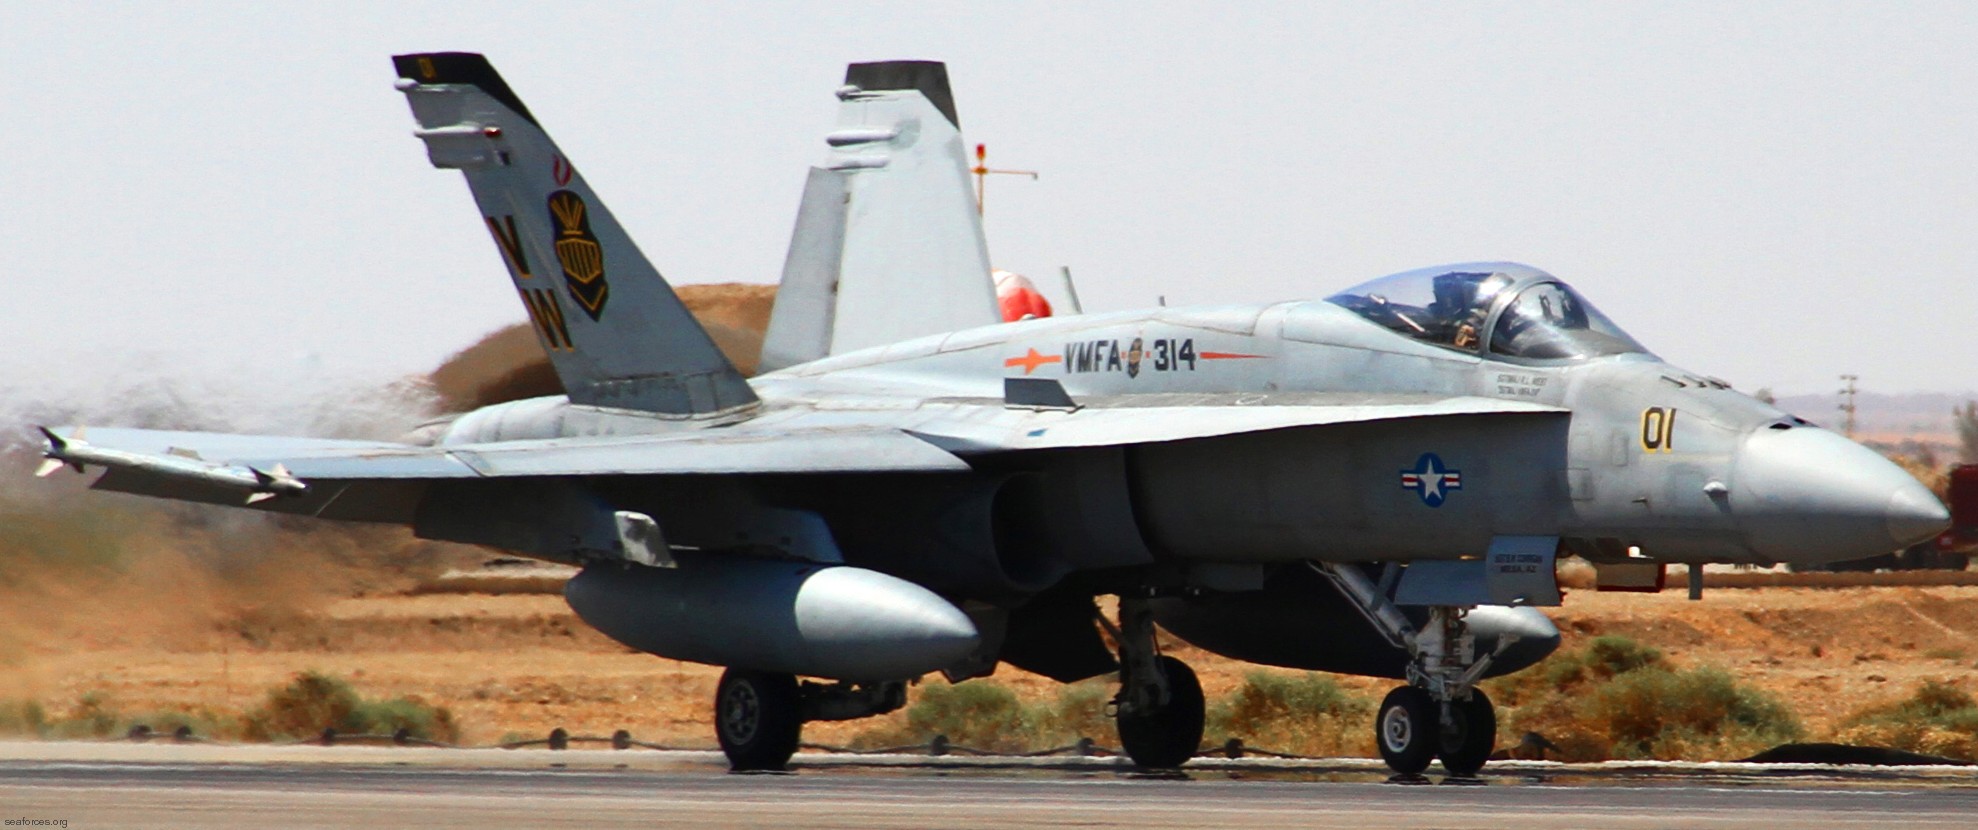 vmfa-314 black knights marine fighter attack squadron f/a-18a hornet 17 exercise eager tiger jordan